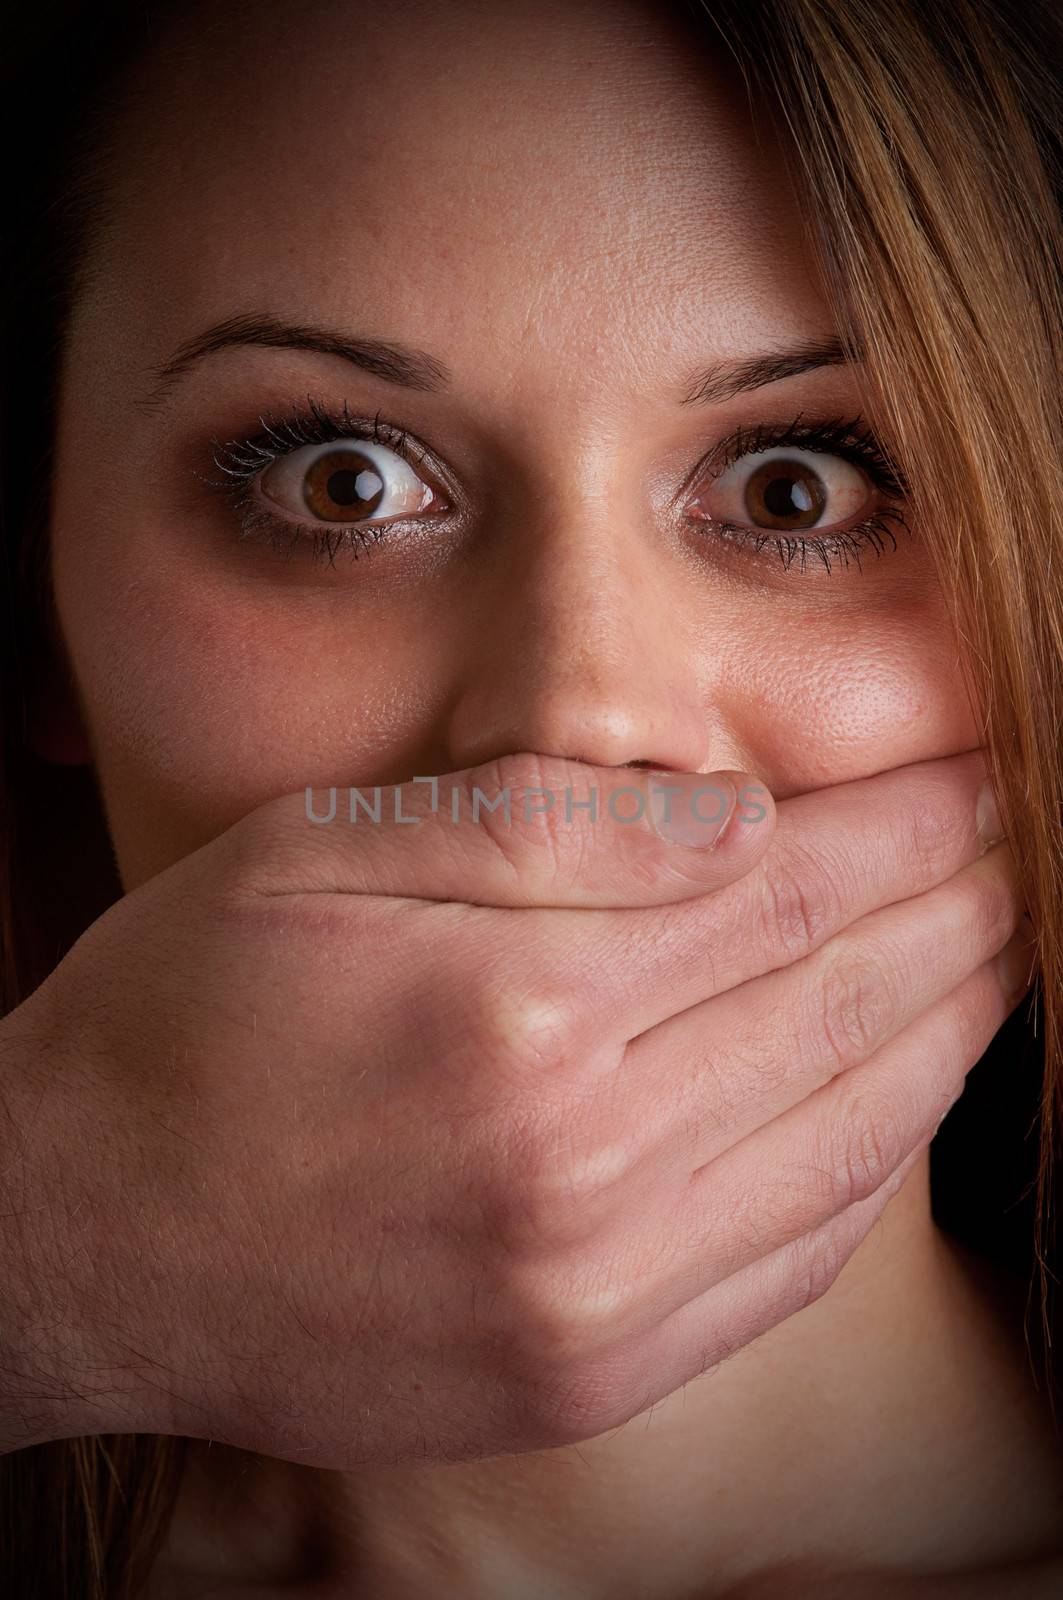 Closeup of a mans hand covering a womans mouth. Concept of domestic violence or kidnapping. Dark mood.